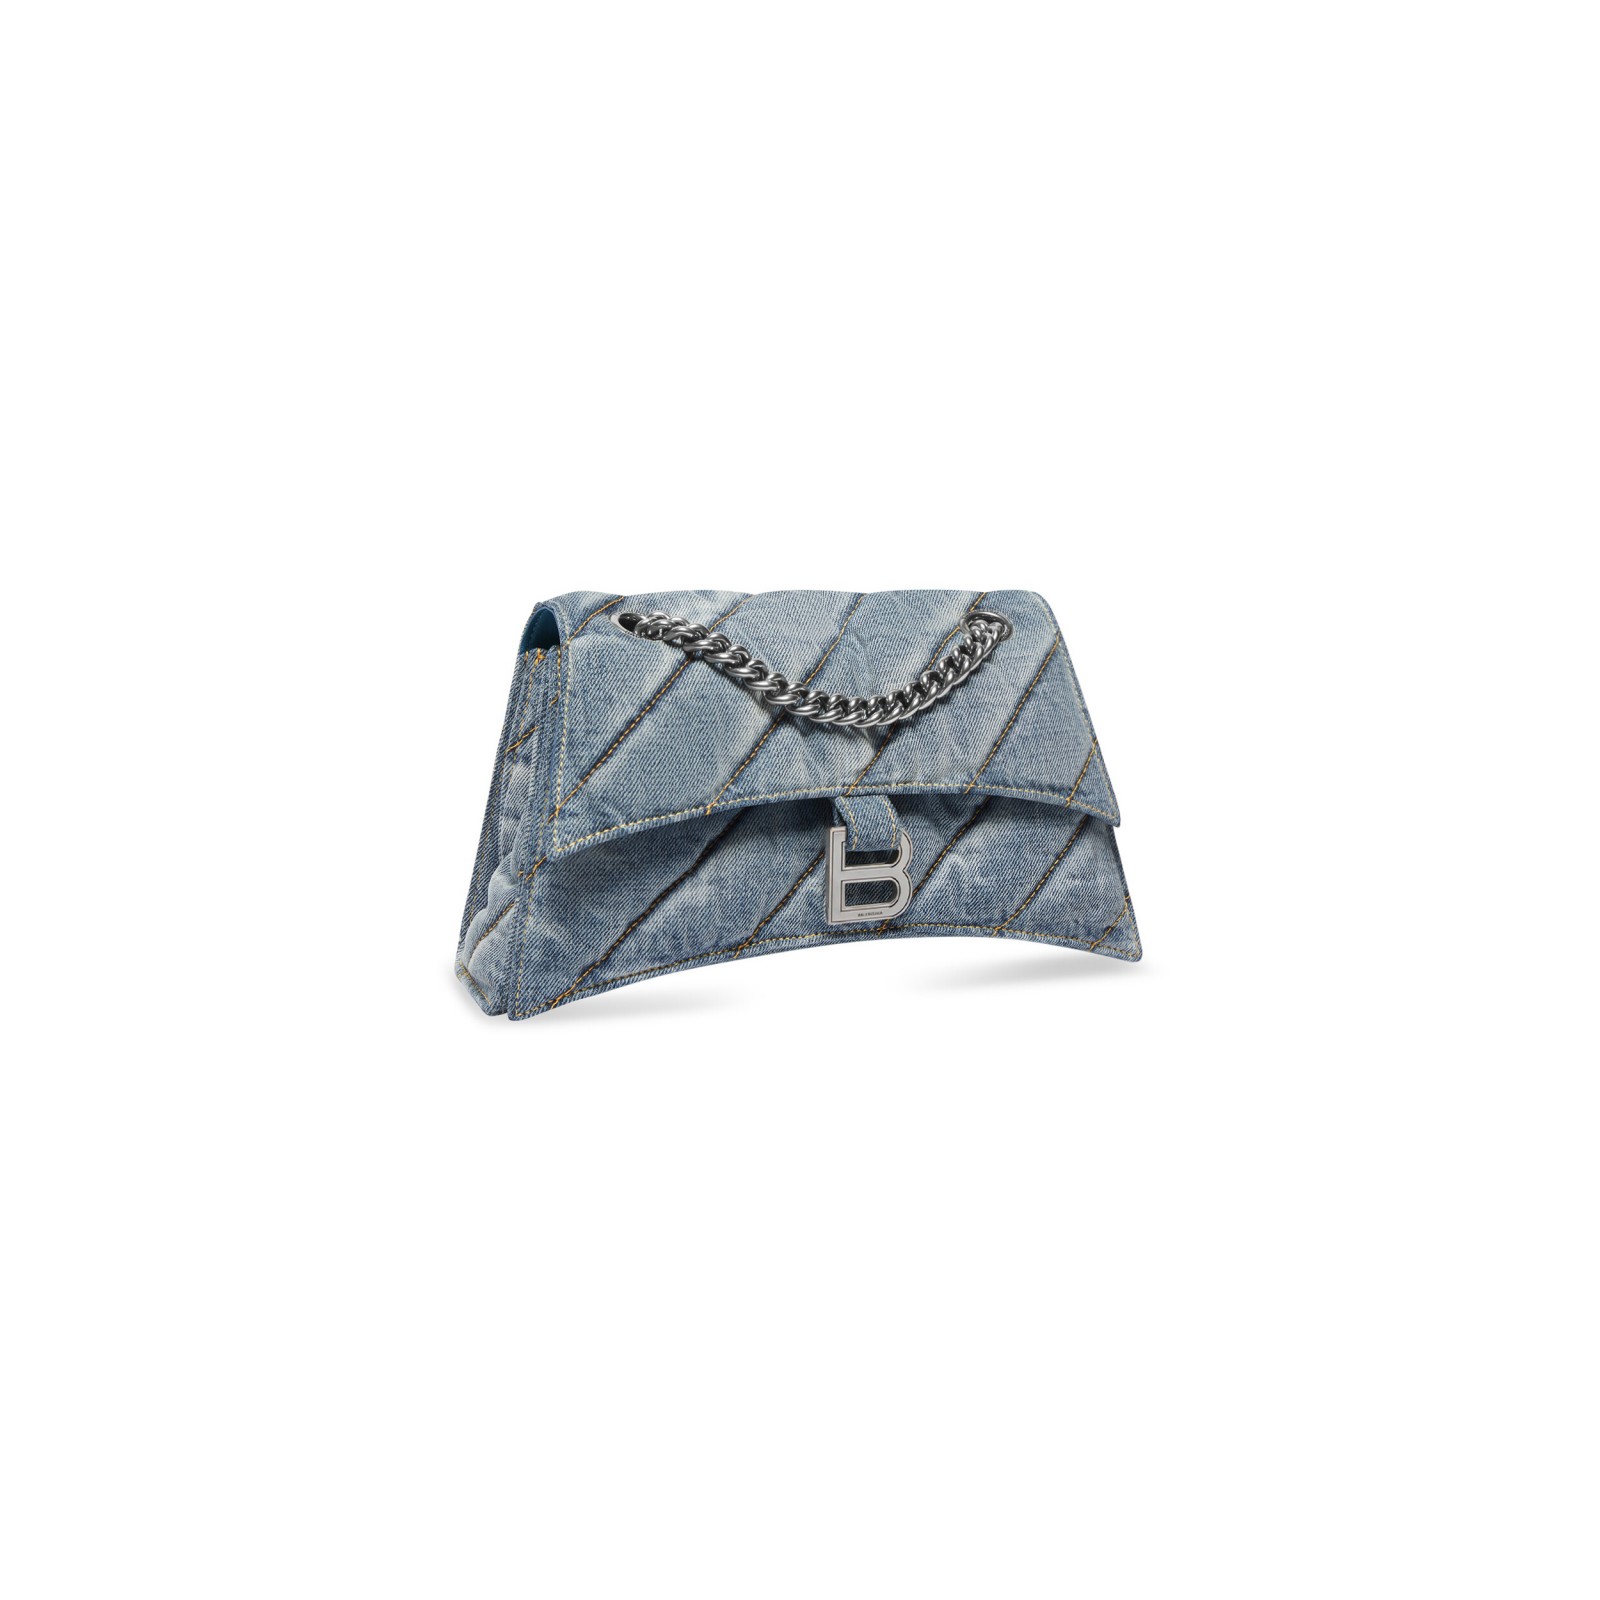 CRUSH SMALL CHAIN BAG QUILTED DENIM